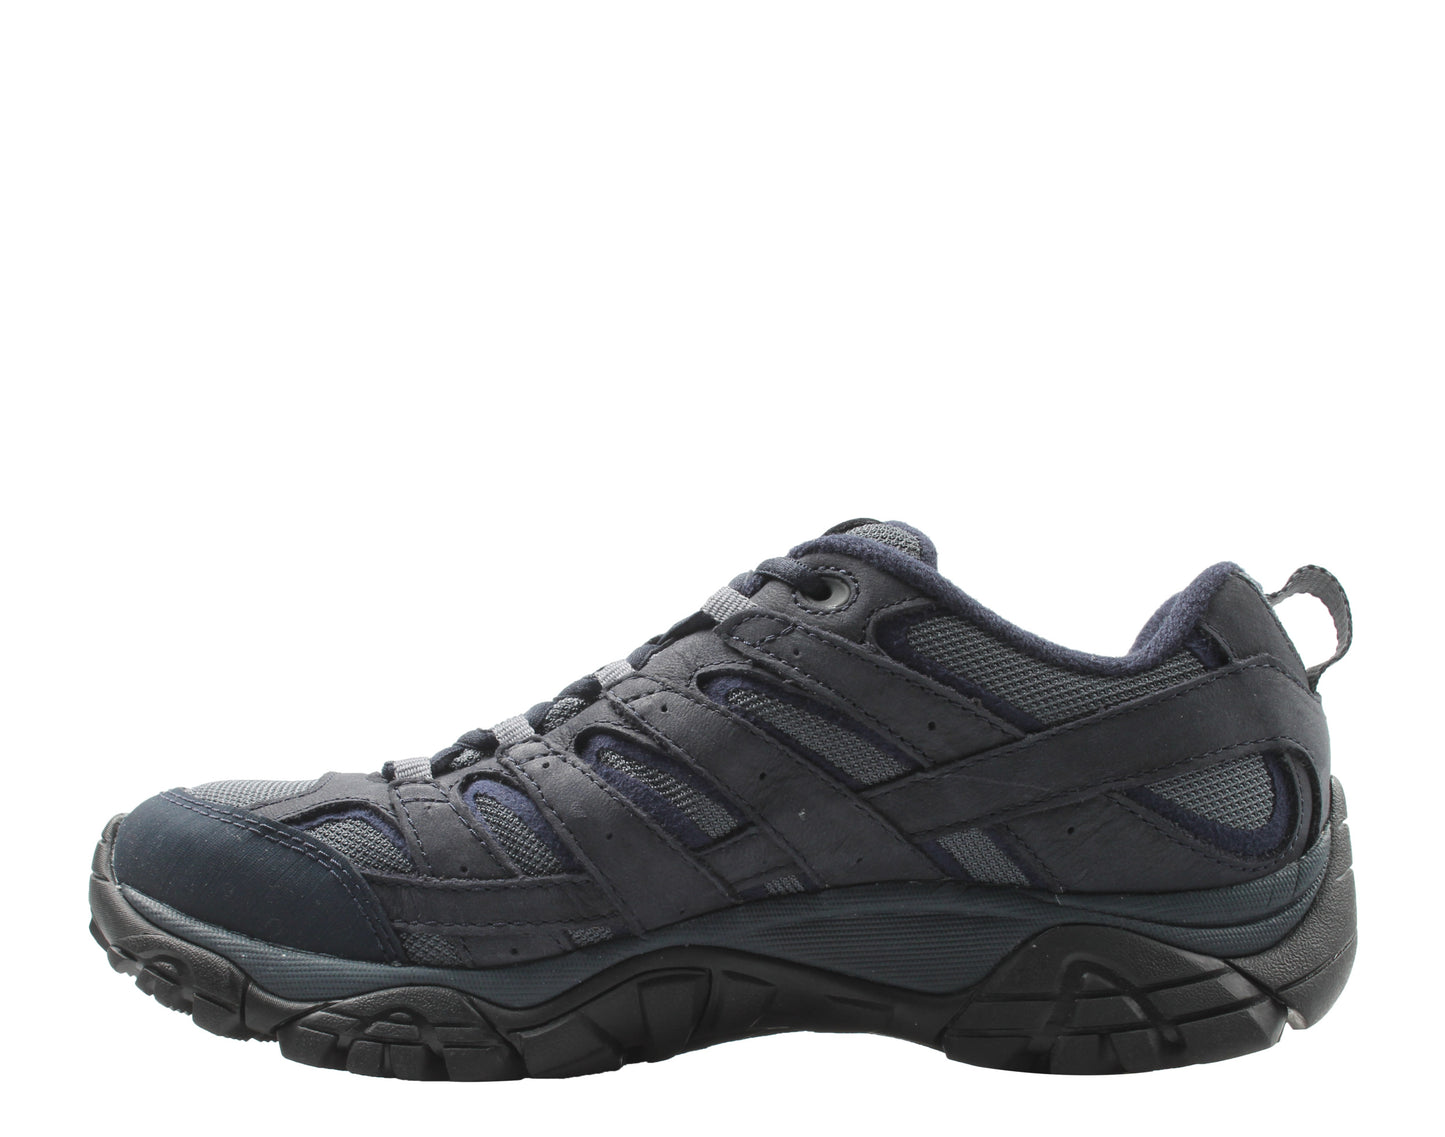 Merrell Moab 2 Smooth Navy Men's Hiking Shoes J42517